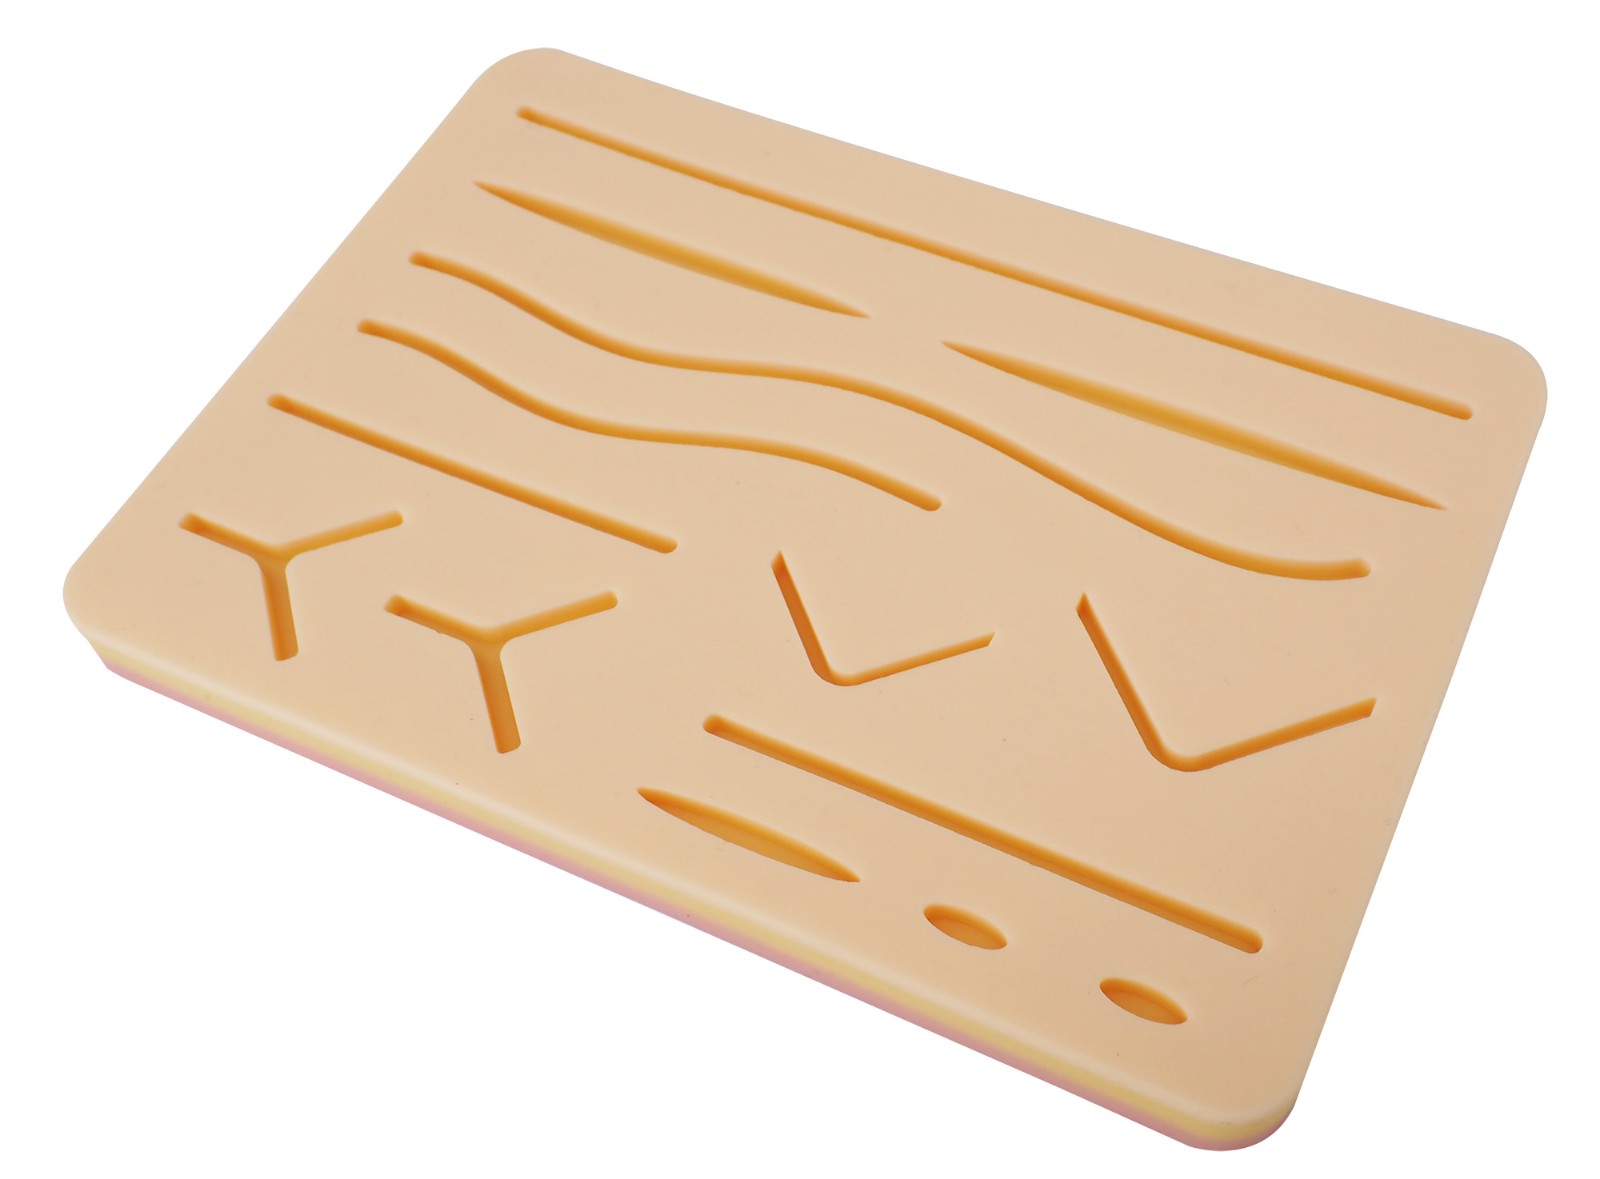 Standard Silicone Suture Training Pad with Wounds